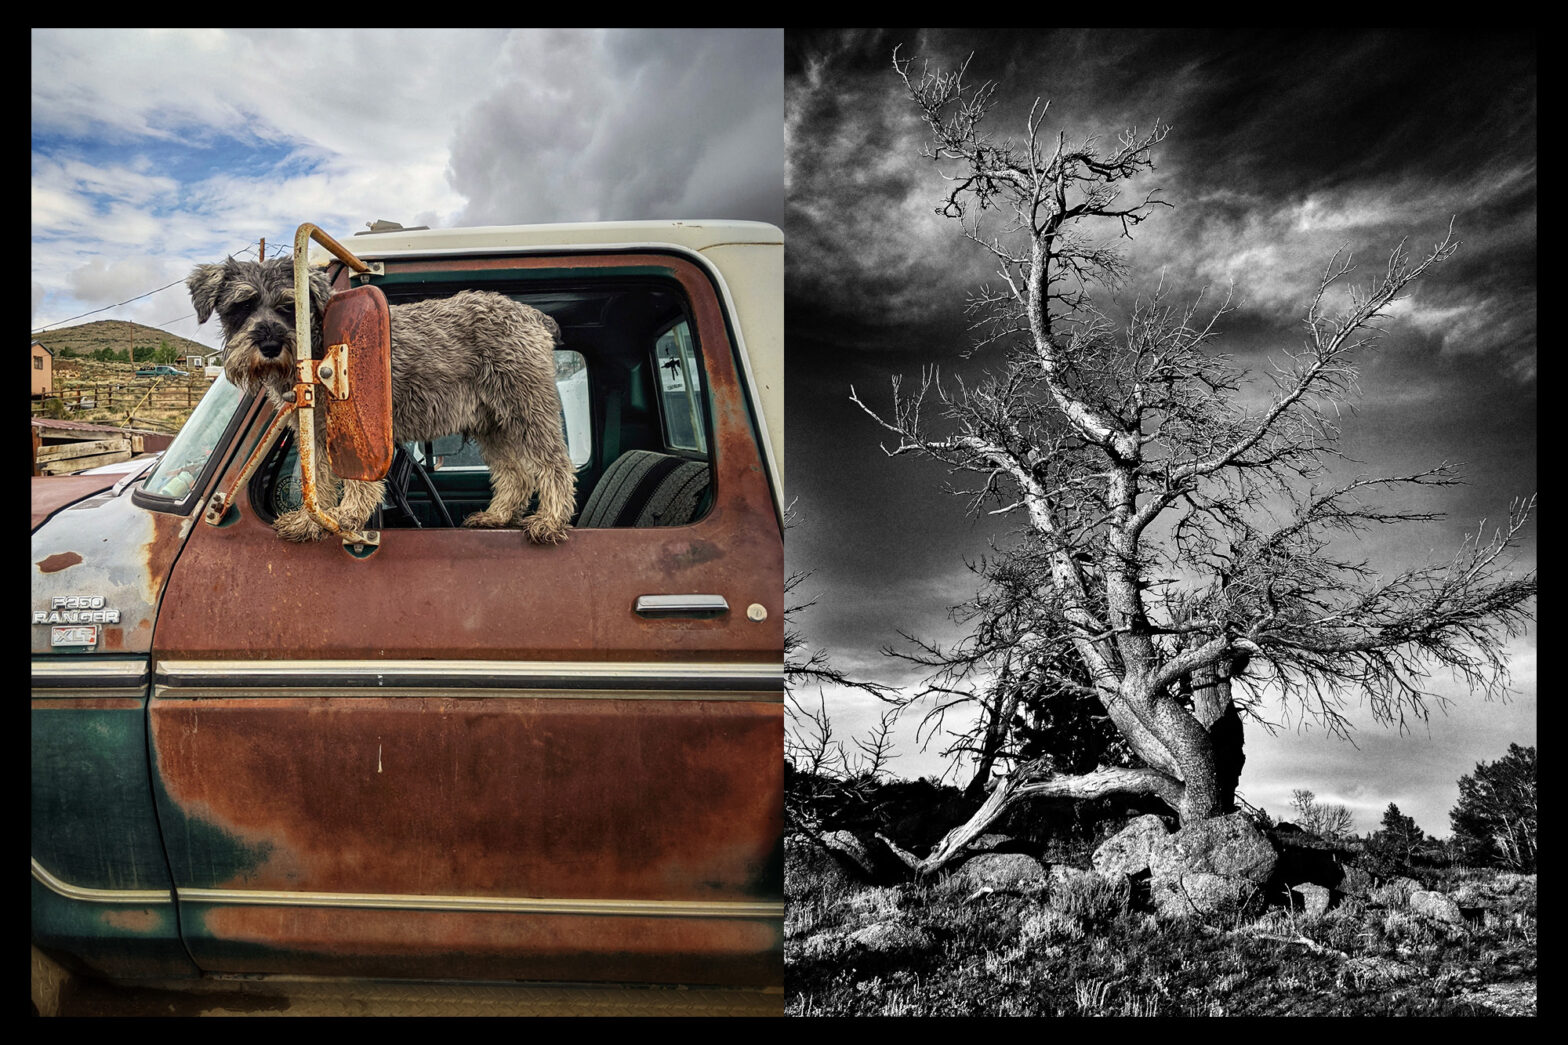 'Wind's Home' photography exhibit on display at Casper College's Mildred Zahradnicek Gallery